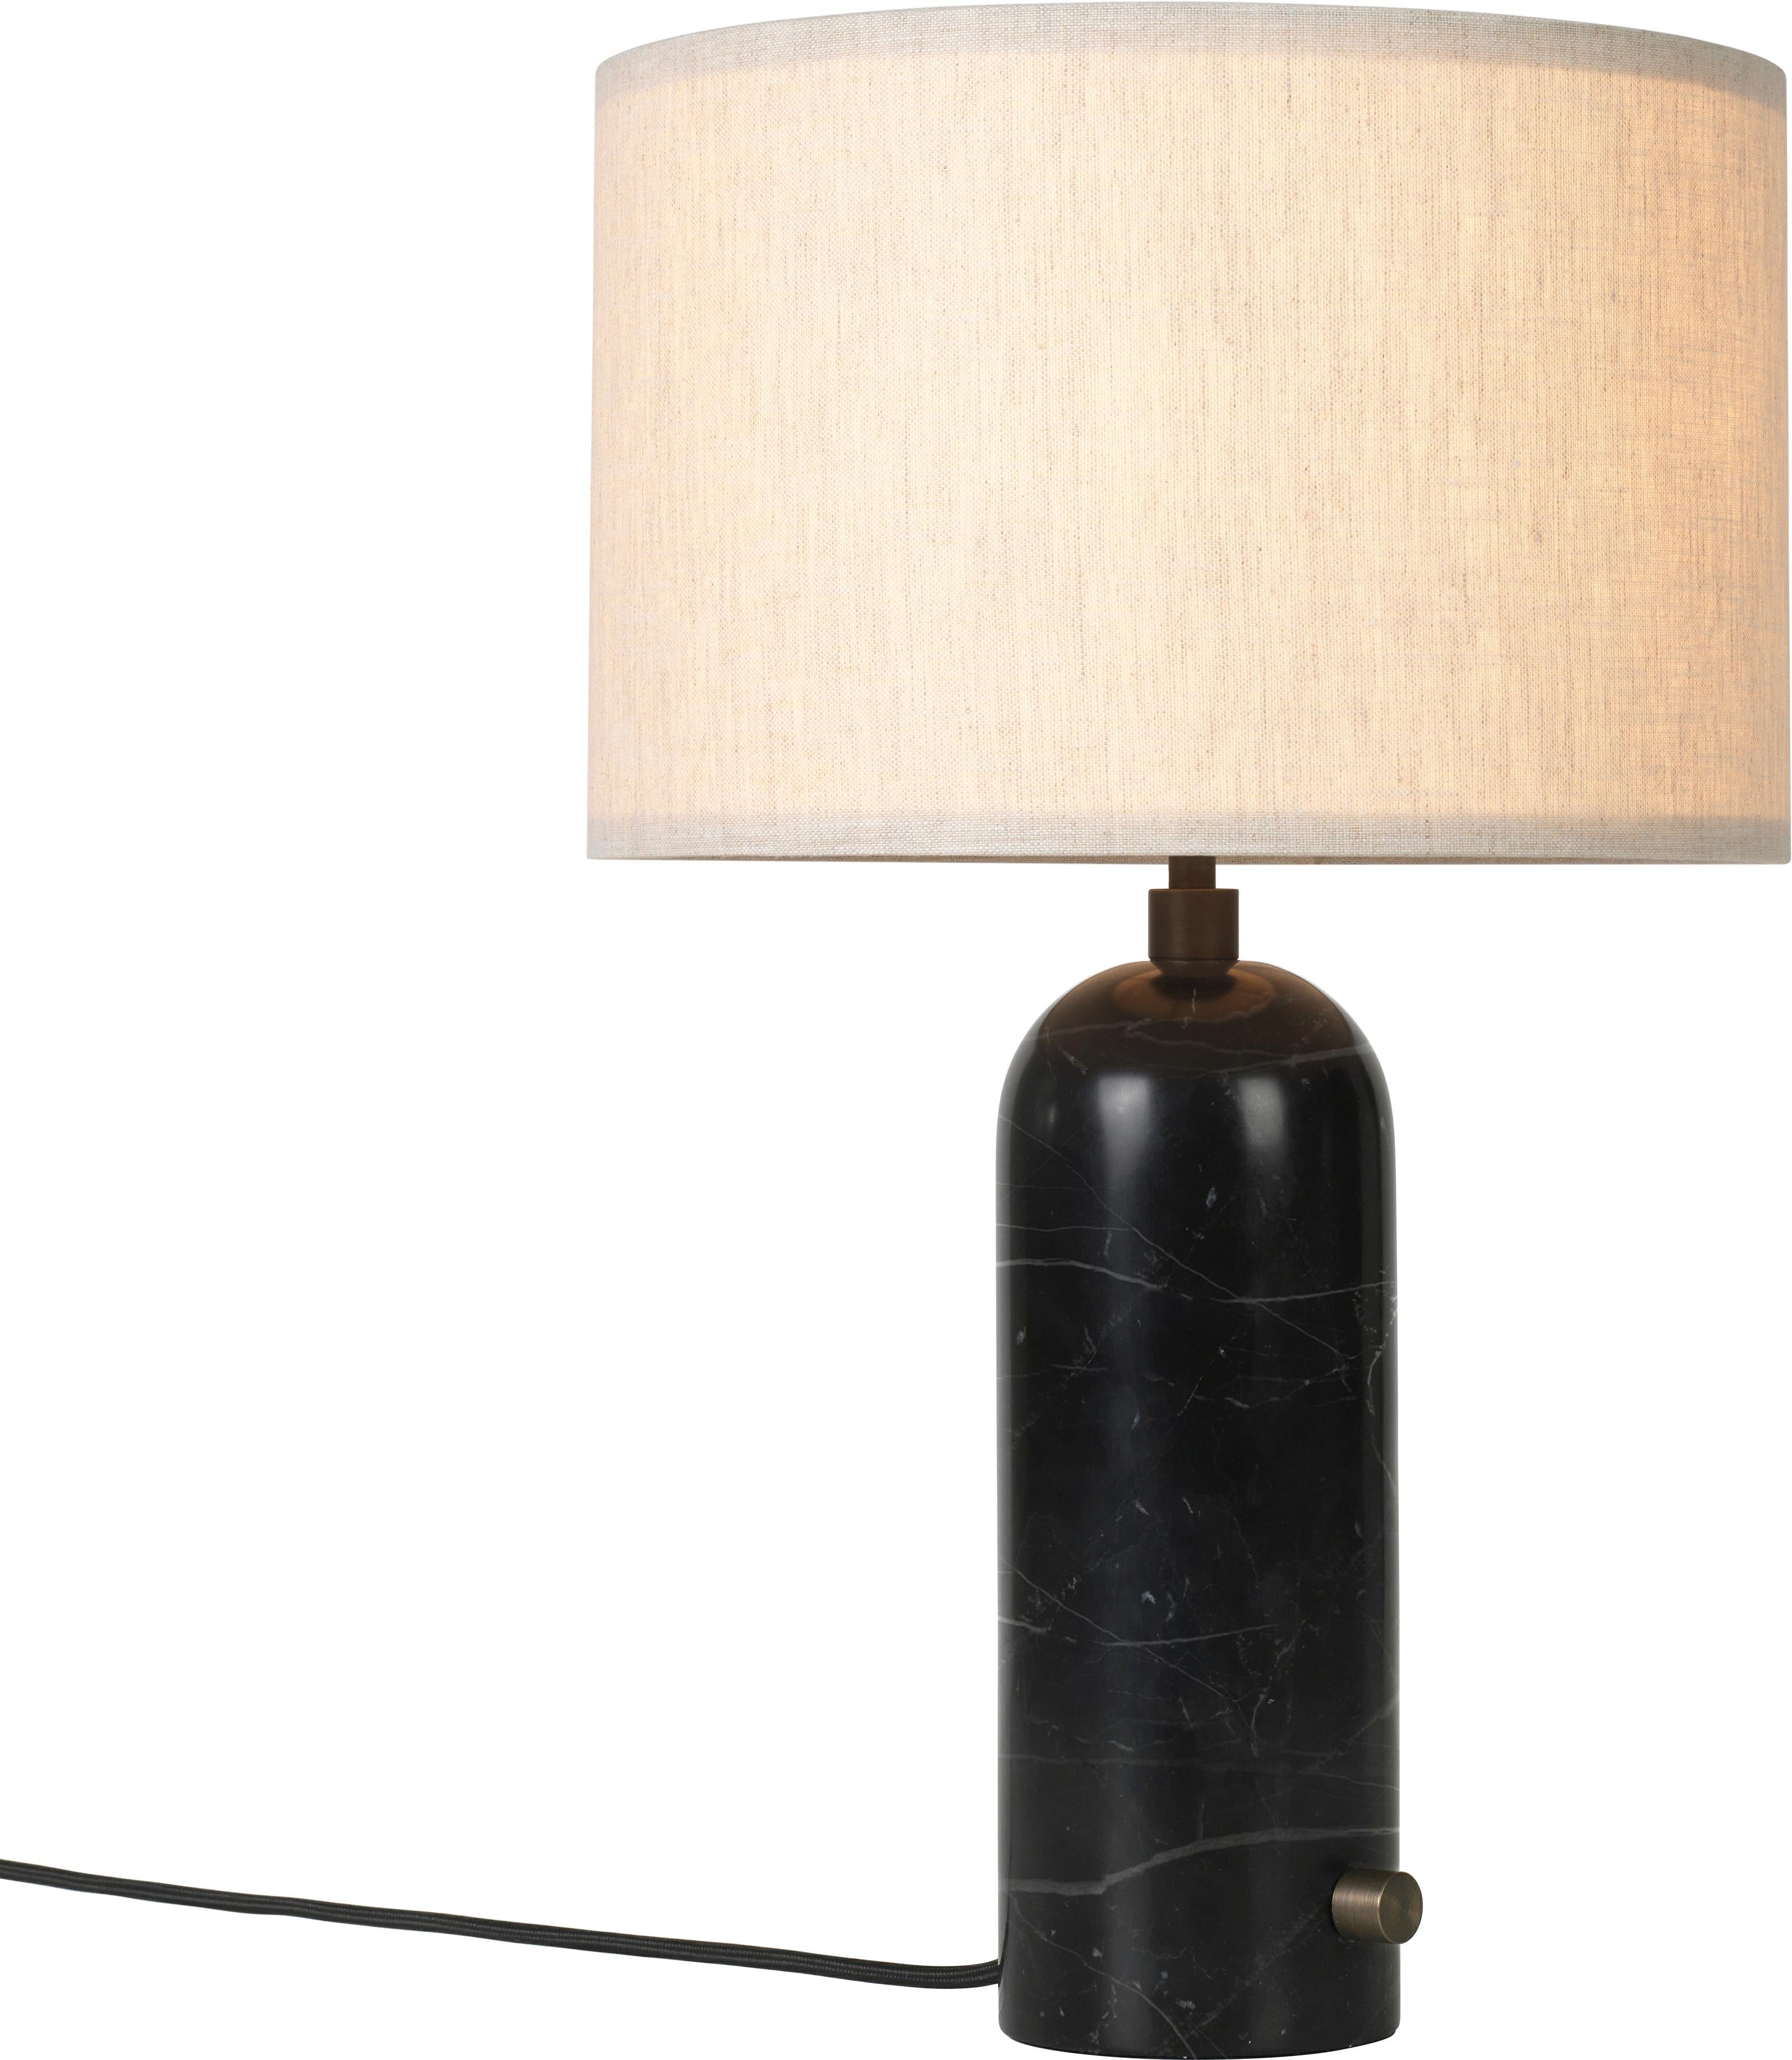 Large 'Gravity' Blackened Steel Table Lamp by Space Copenhagen for Gubi For Sale 2